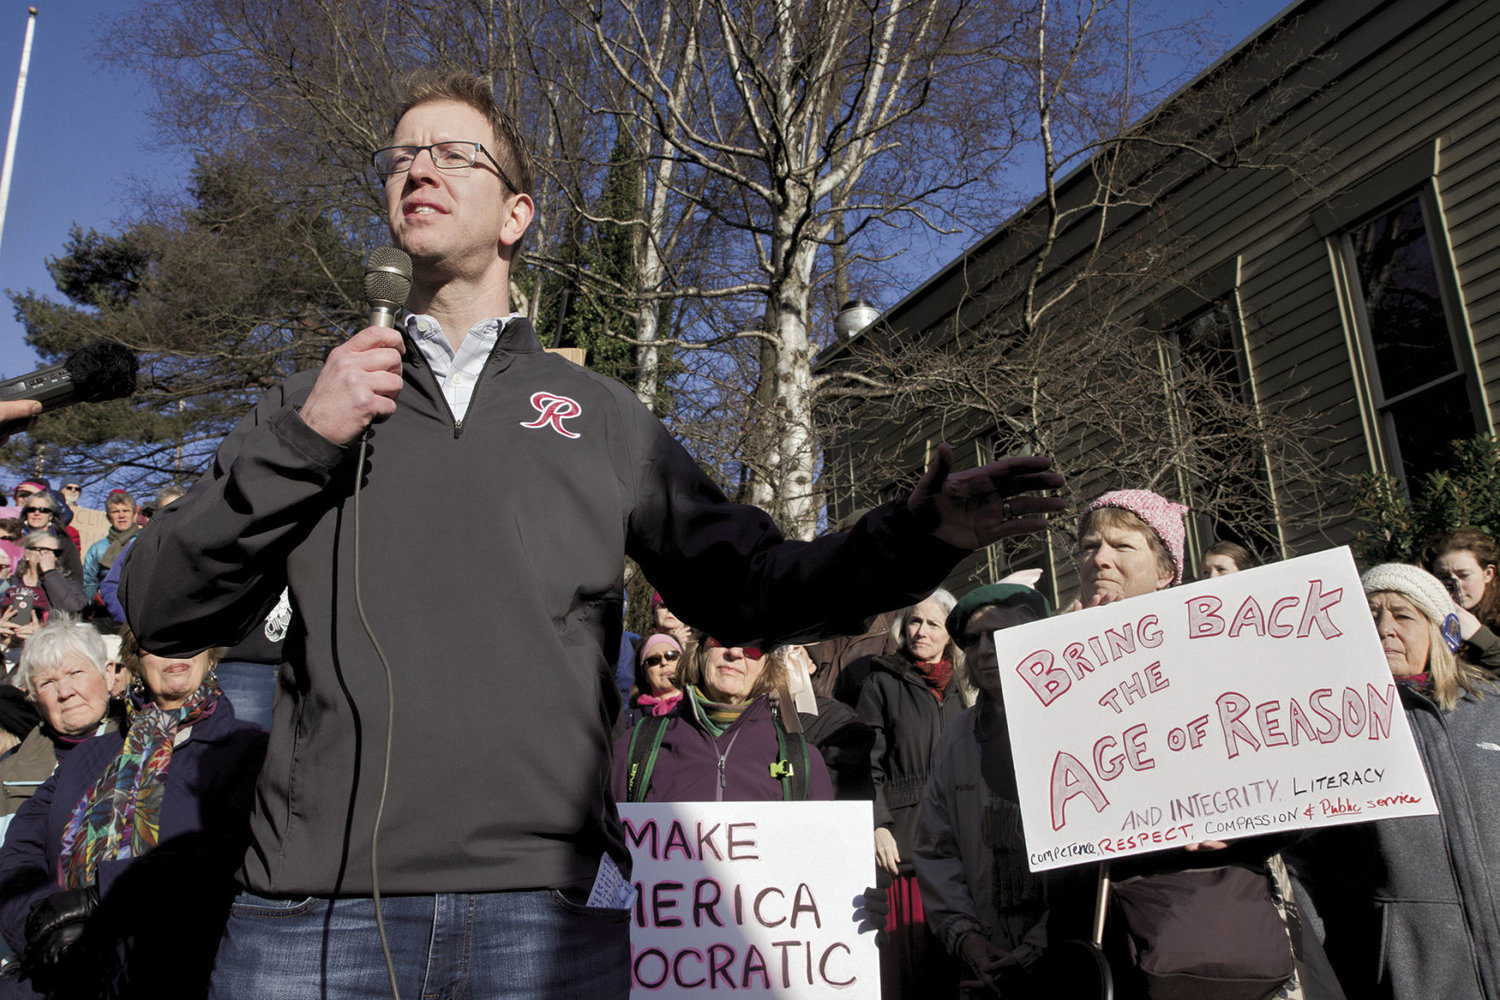 U.S. Rep. Derek Kilmer spoke to an audience of almost 1,000 in downtown Port Townsend Saturday, Jan. 21, telling constituents it was important that they were there to stand up for health care, immigrants, climate change, women of all ages and children. File photo by Allison Arthur